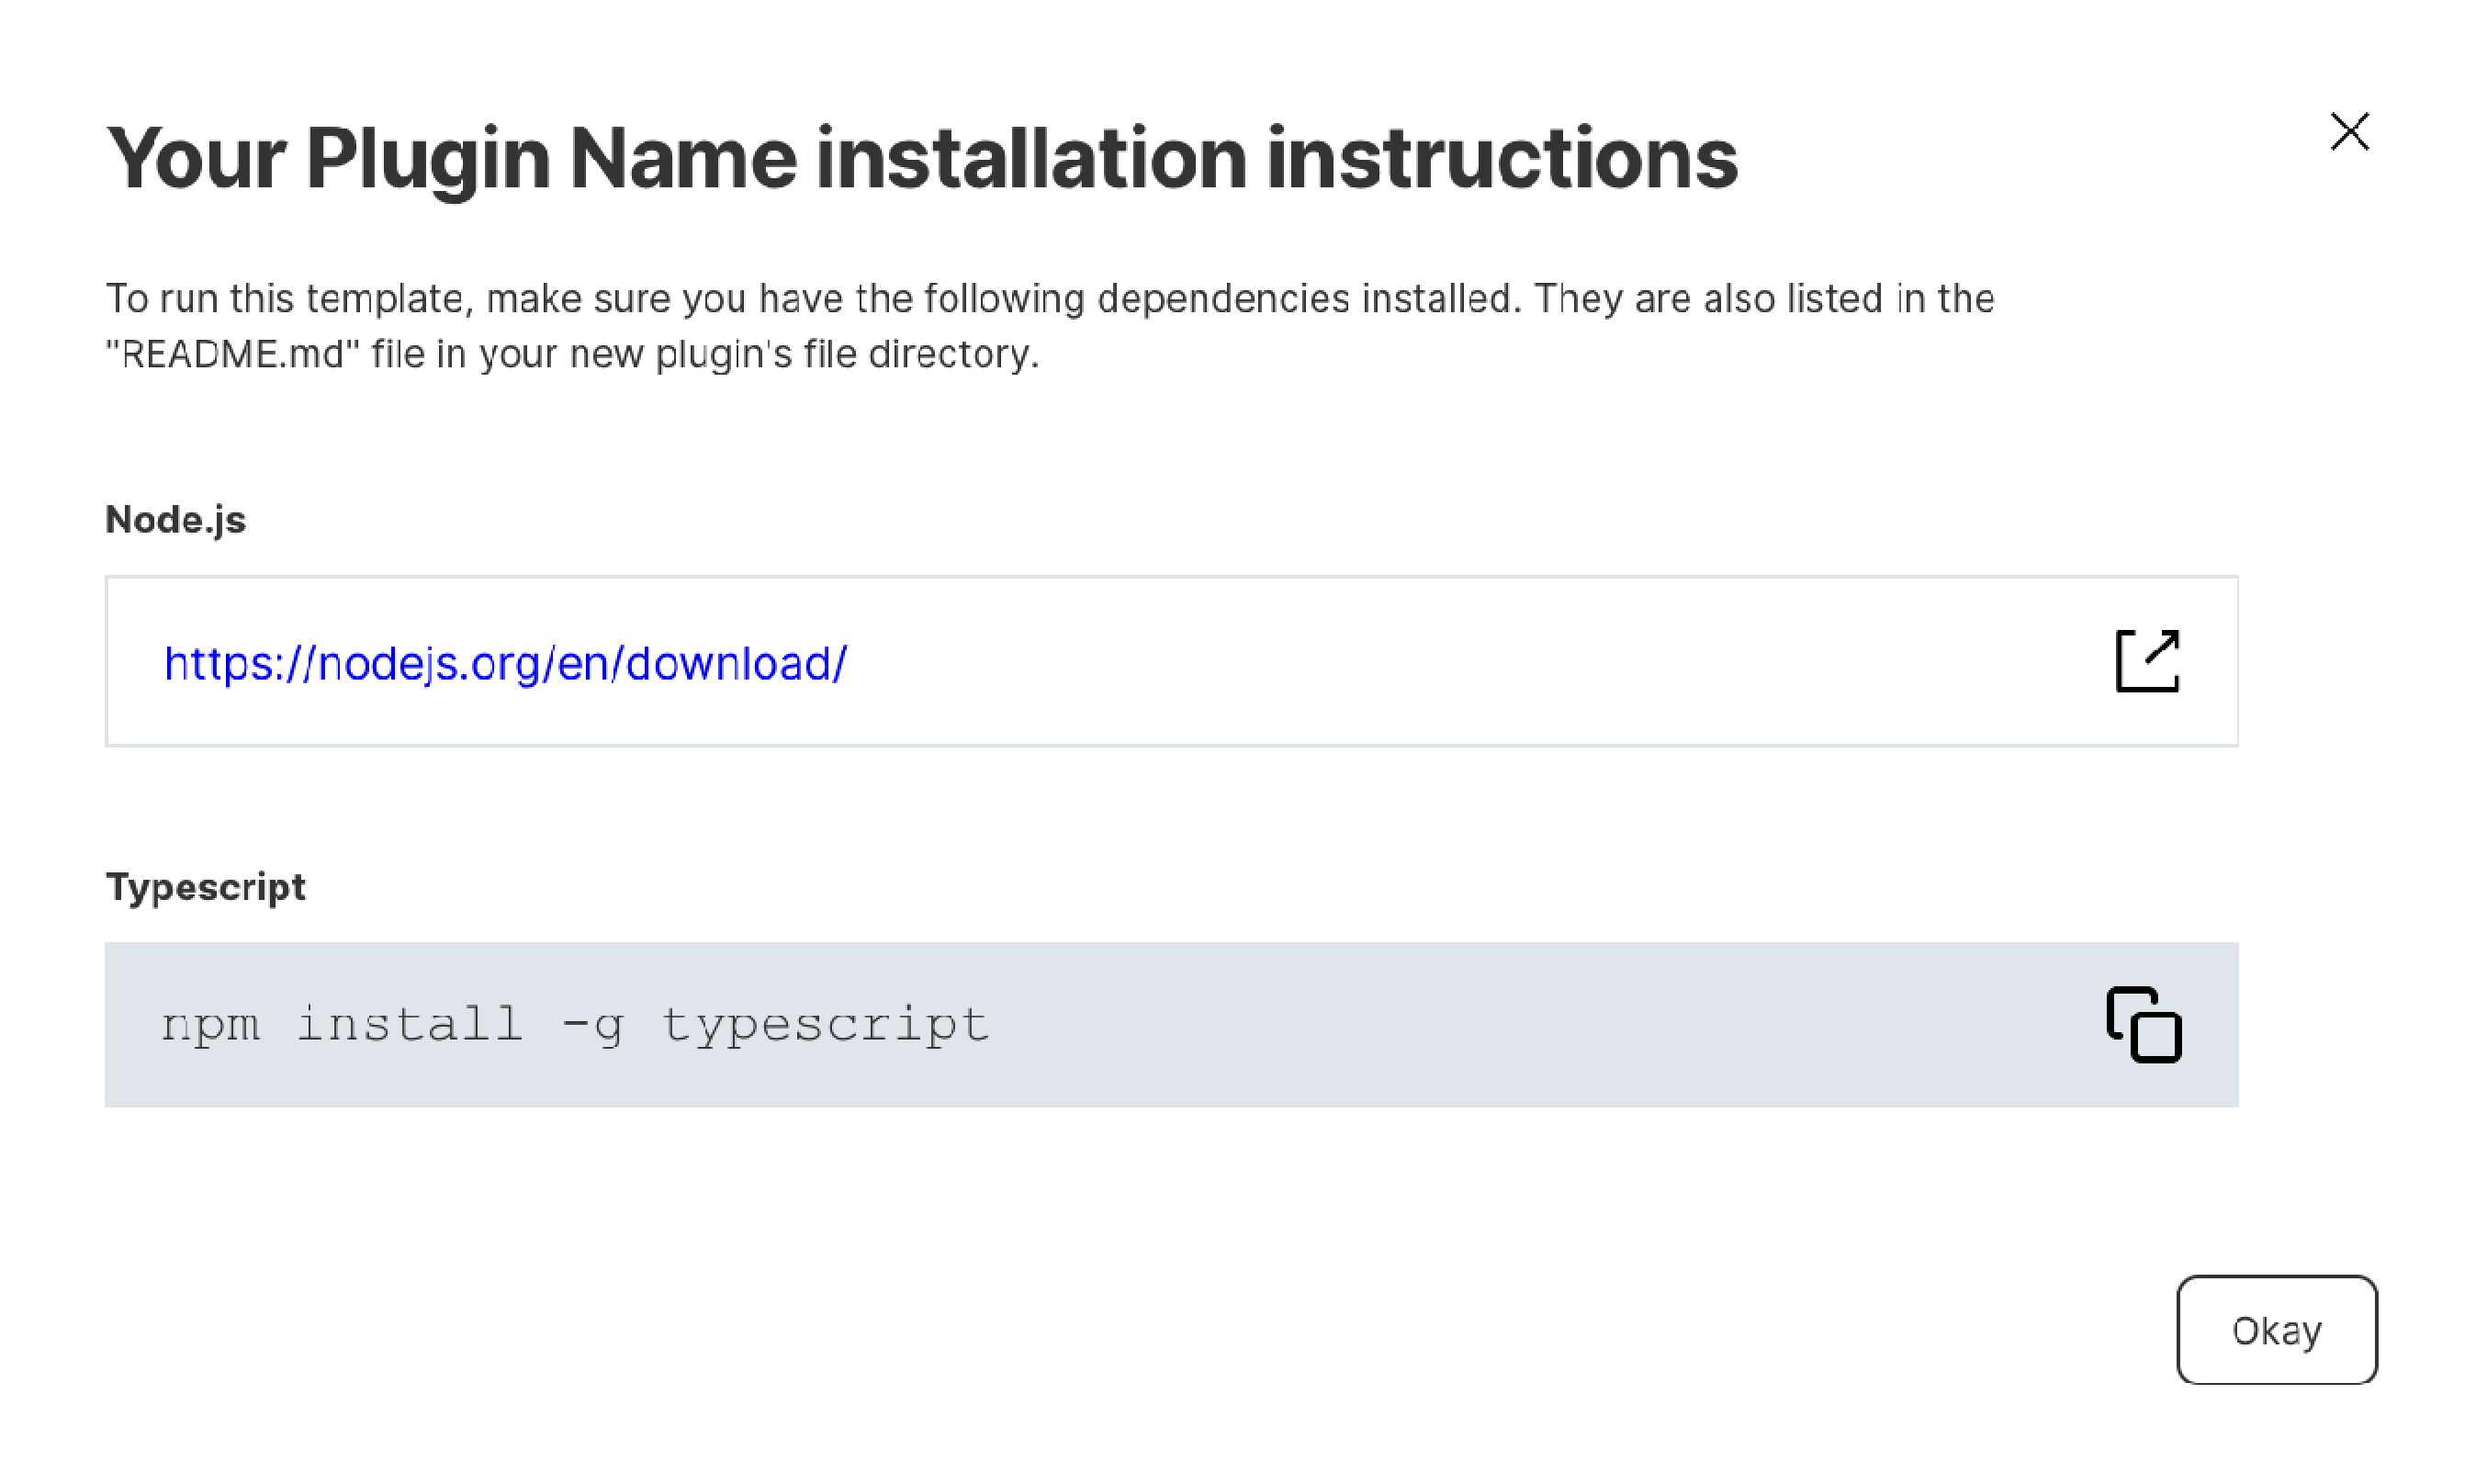 Installation instructions modal with options for further actions including downloading node.js or copying install code